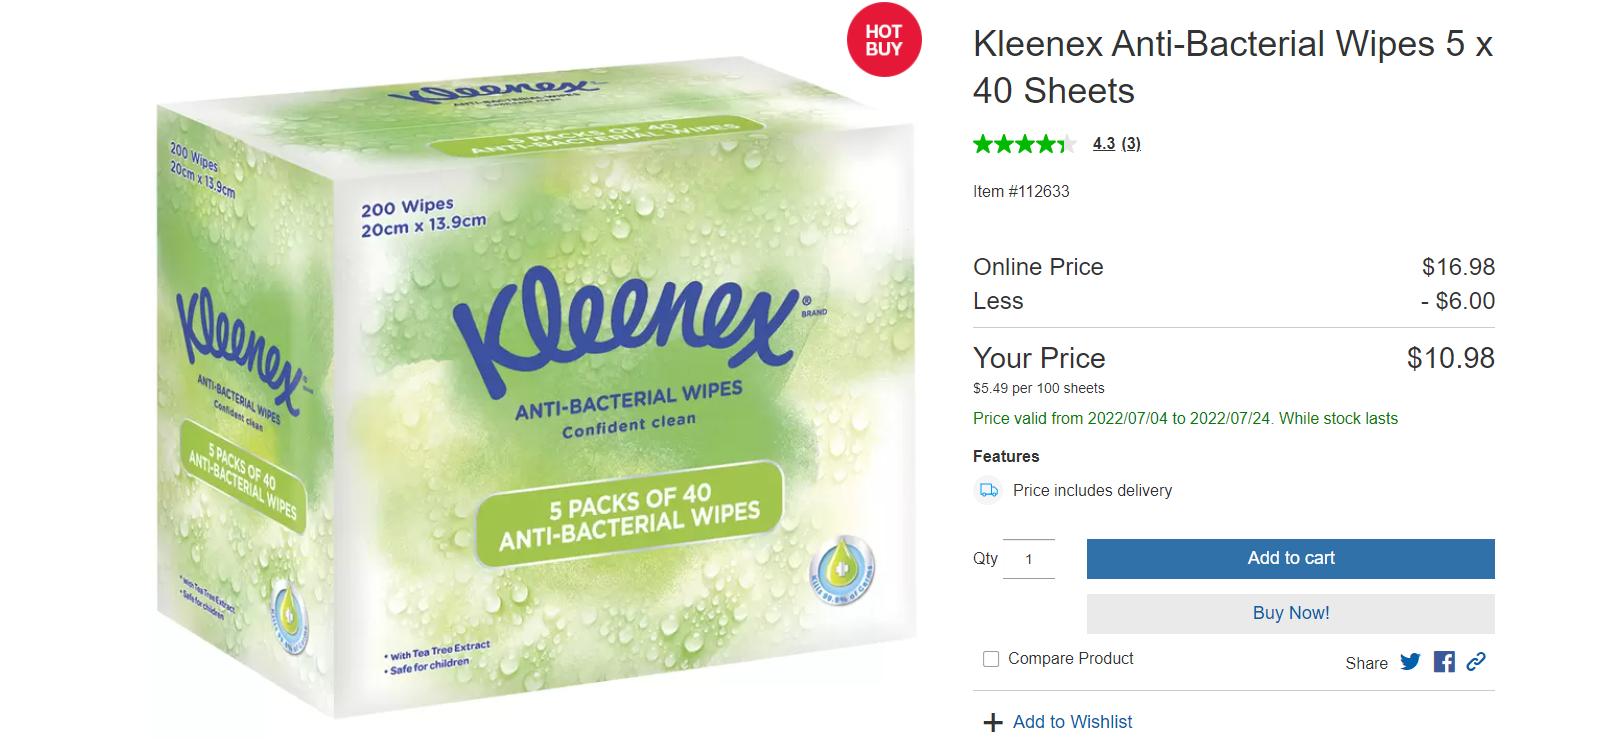 Kleenex Anti-Bacterial Wipes 5 x 40 Sheets now $10.98 delivered at Costco[members]